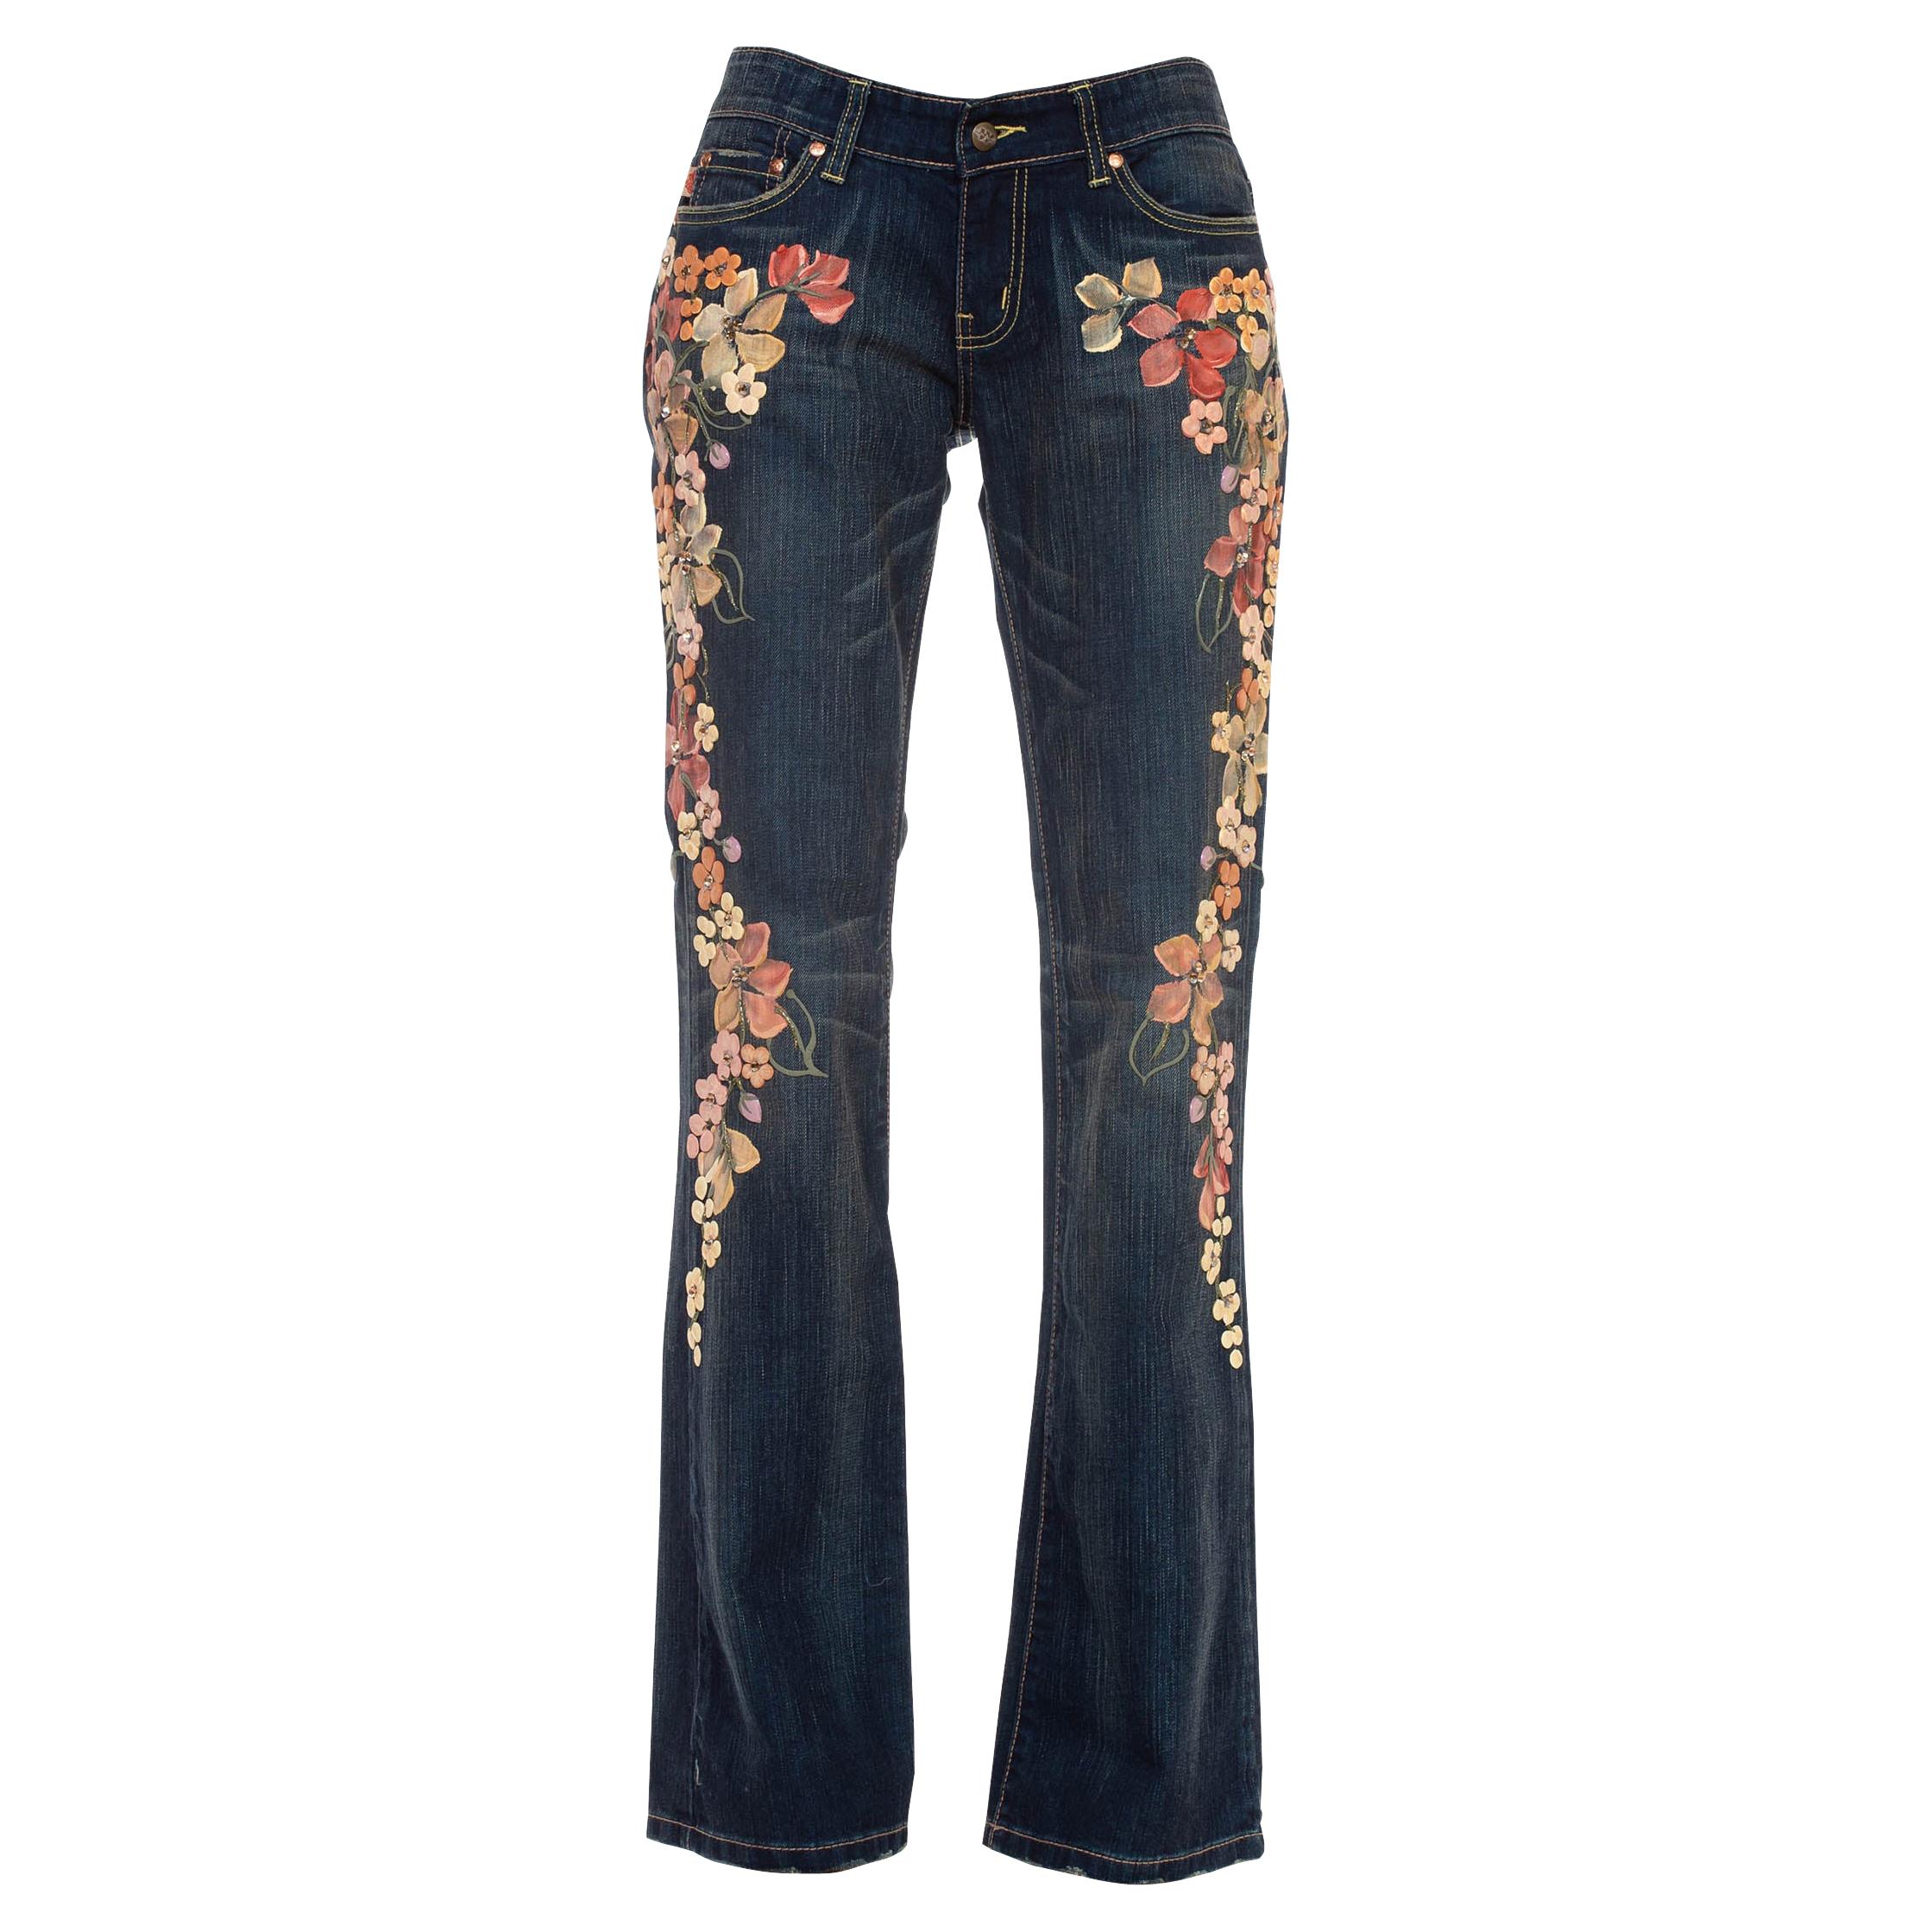 1990S EMA SAVAHL Cotton & Spandex Denim Jeans With Floral Puffy Paint Crystal D